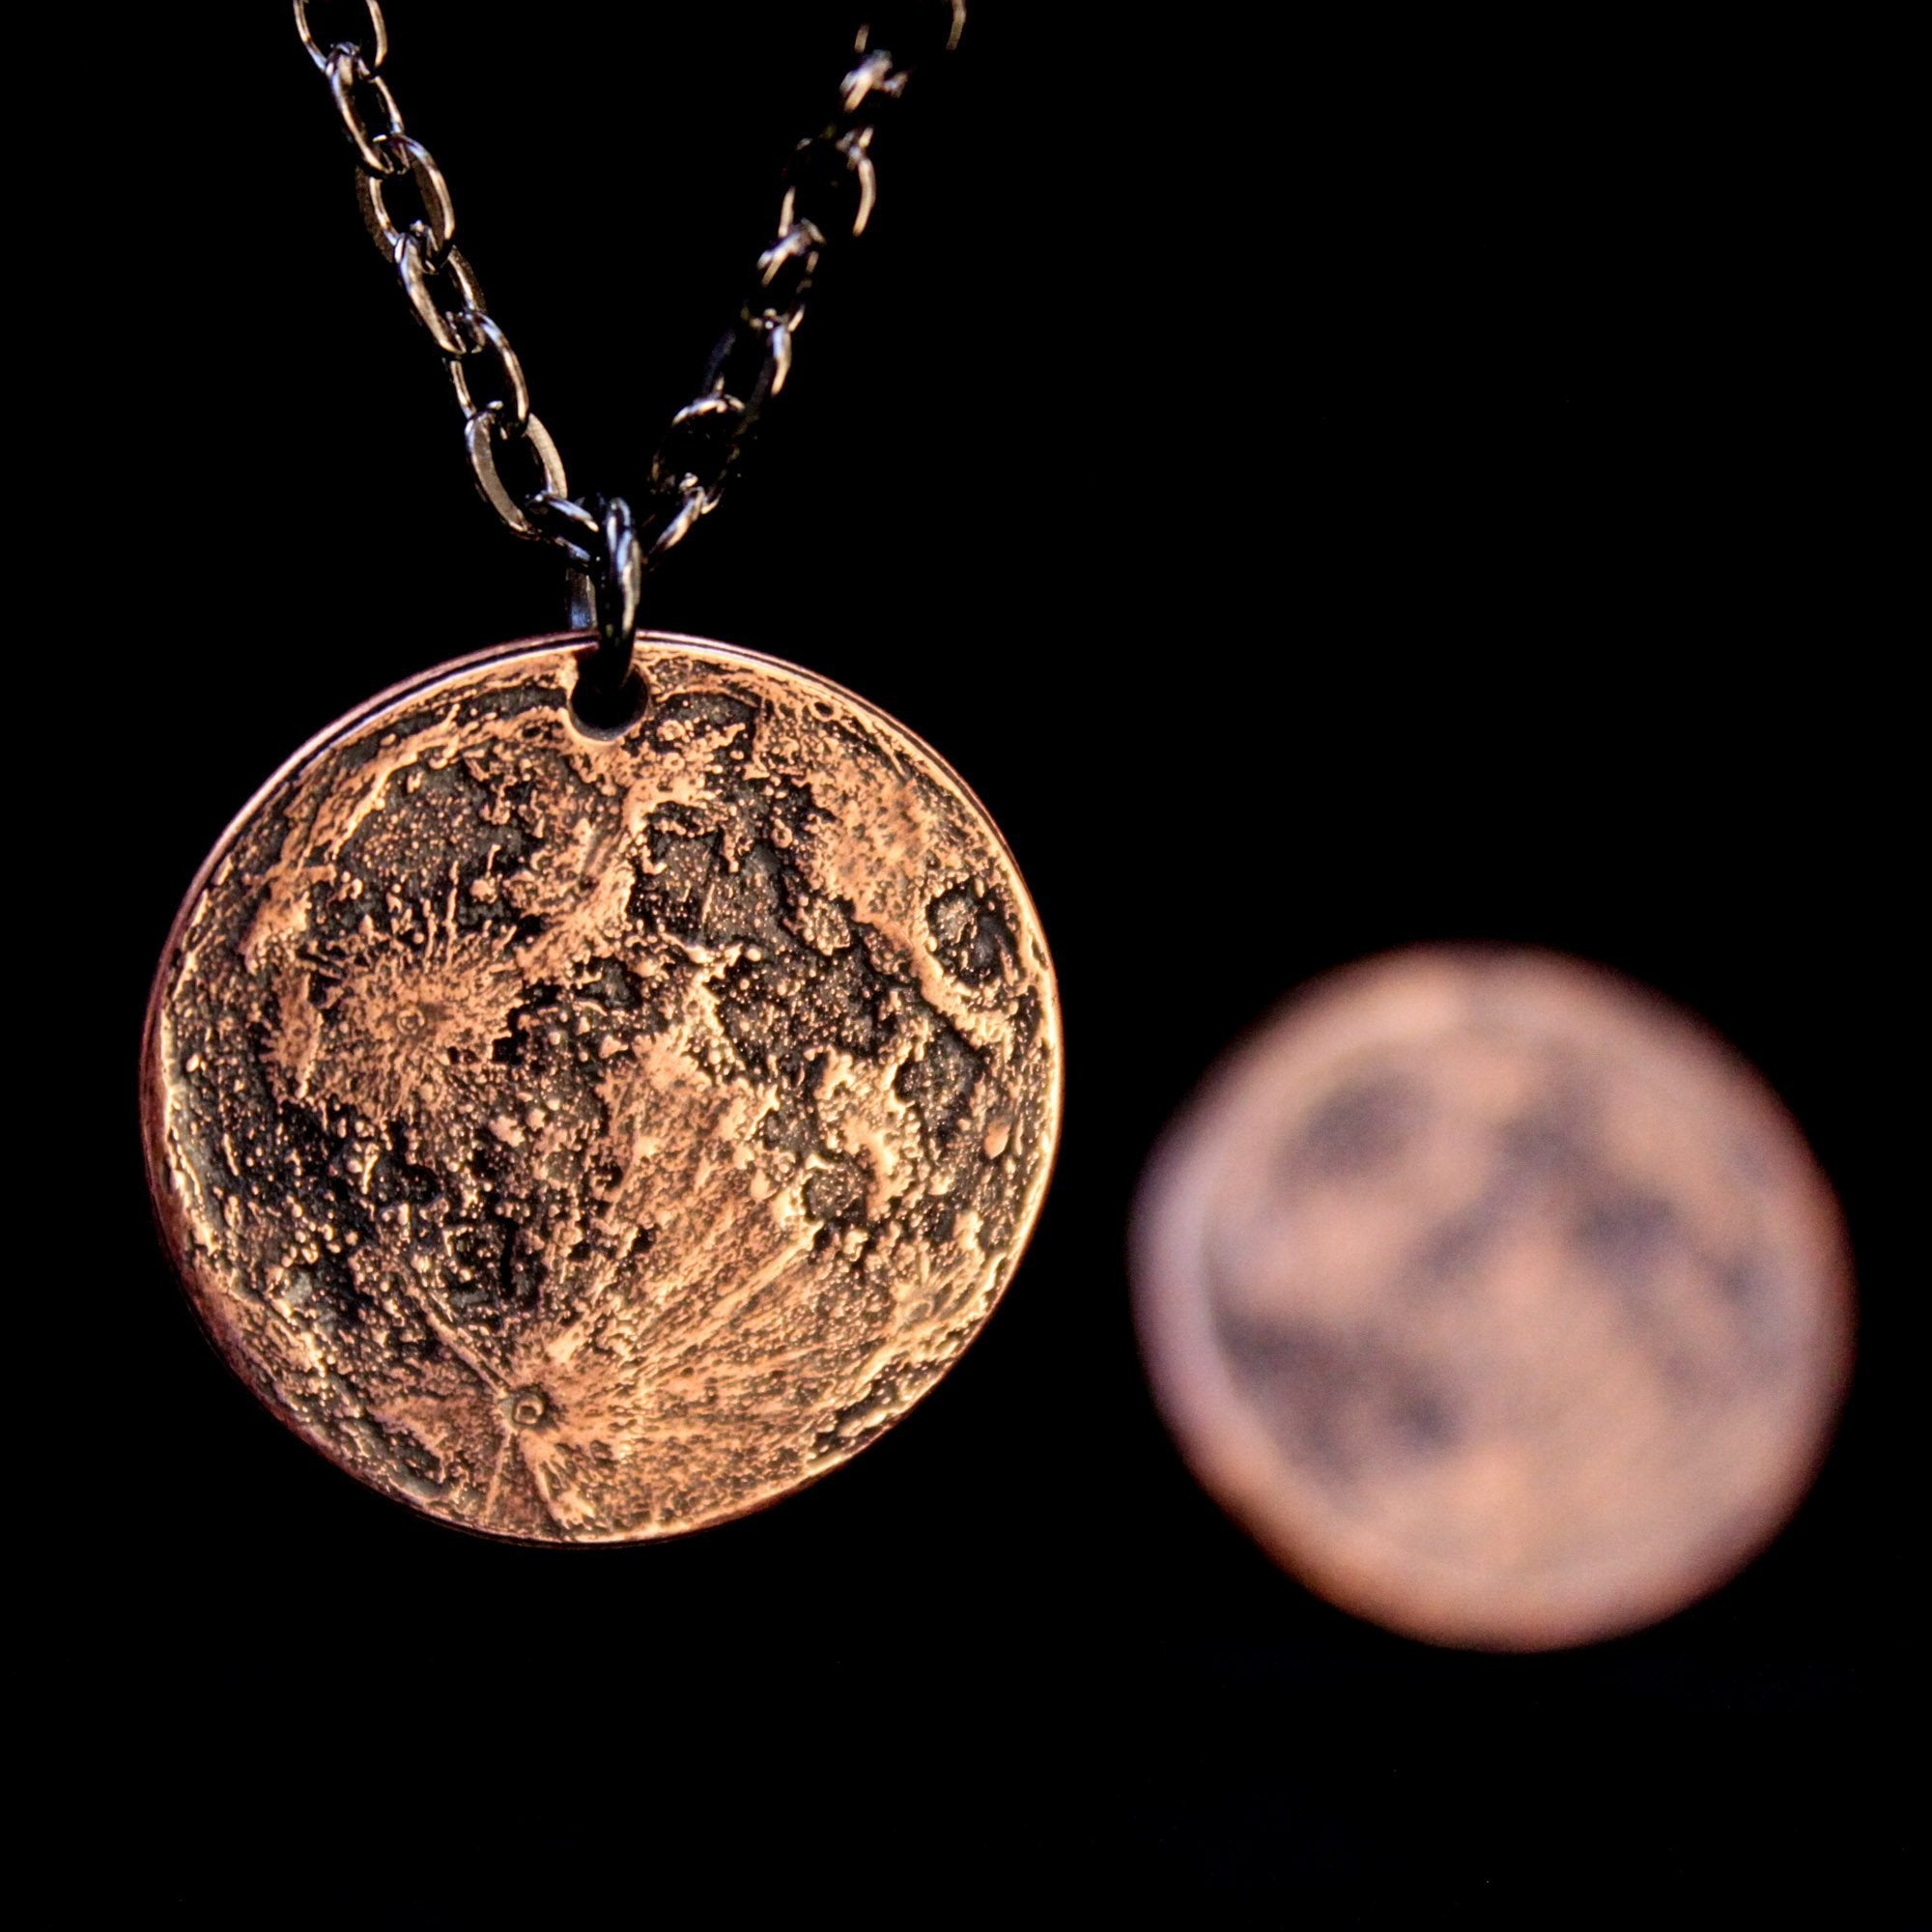 Blood Moon Copper Necklace - 1" Pendant or Charm